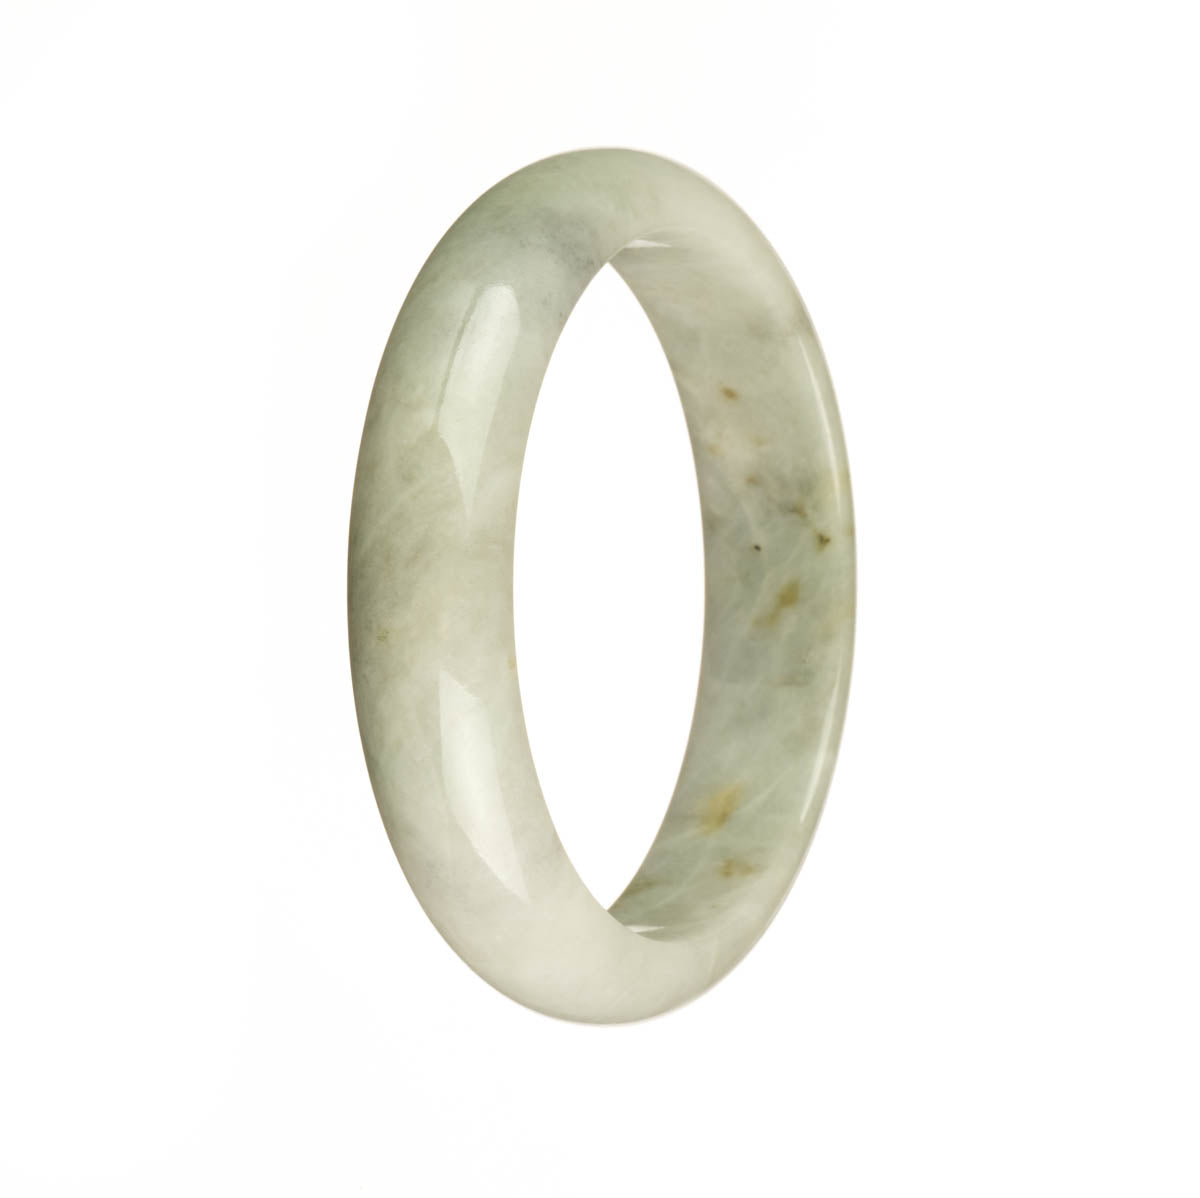 A close-up image of a half moon-shaped grey jadeite bracelet with brown spots. This bracelet is certified Grade A and measures 56mm in size. It is a beautiful piece of jewelry from MAYS™.